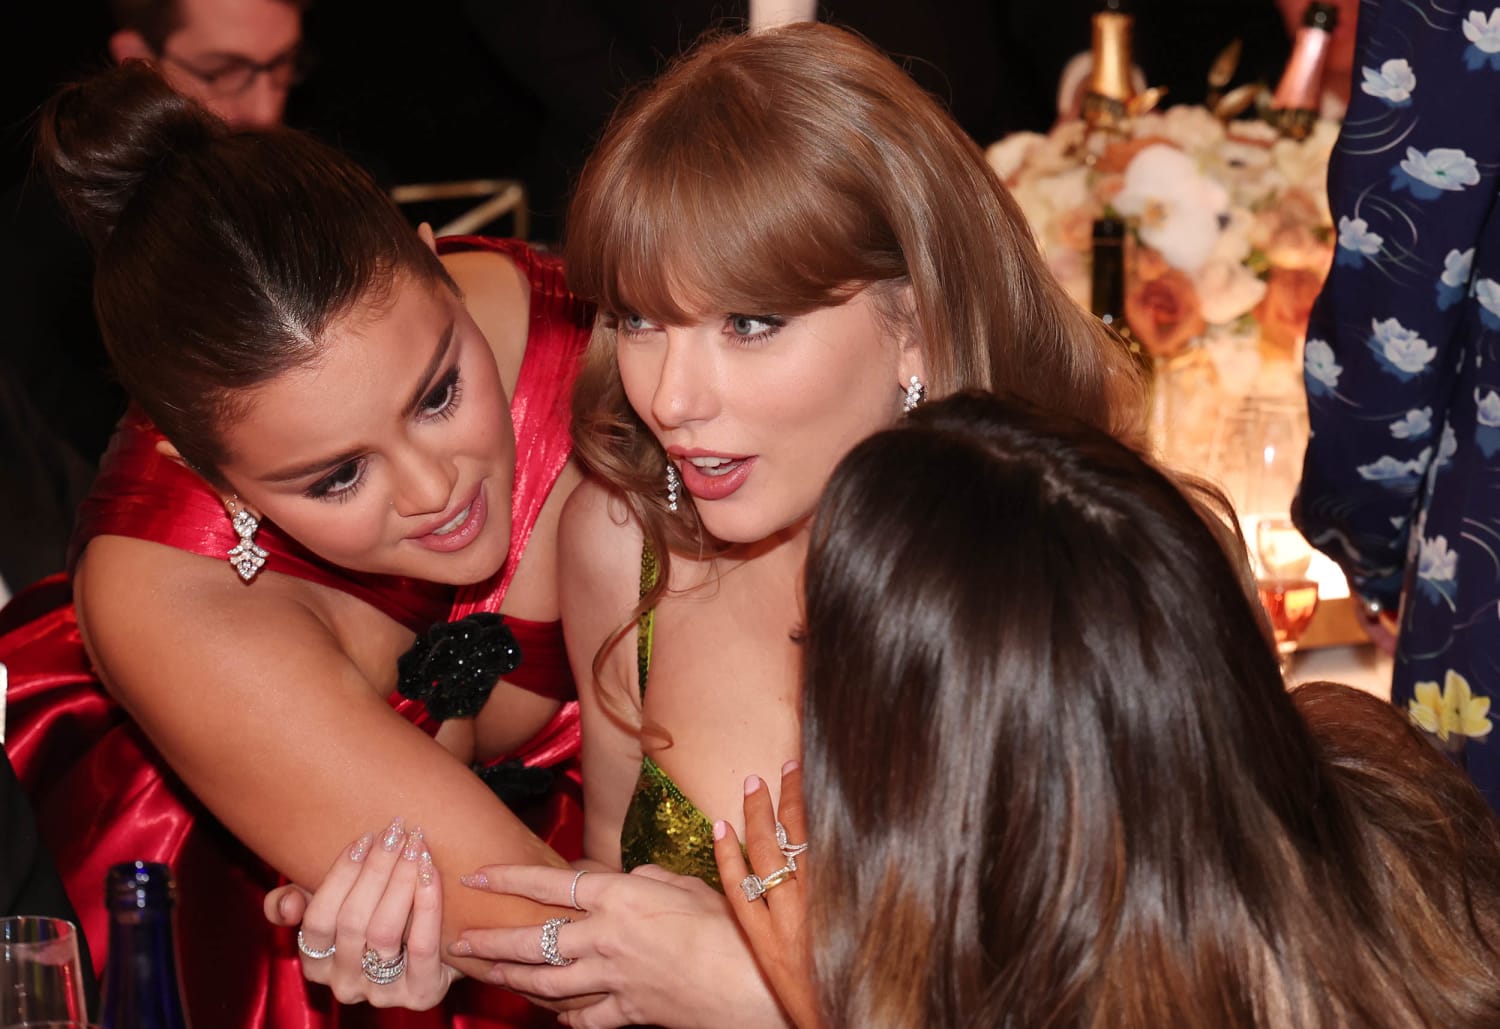 Taylor Swift and Selena Gomez Were Whispering at the Golden Globes, and It Looked Juicy